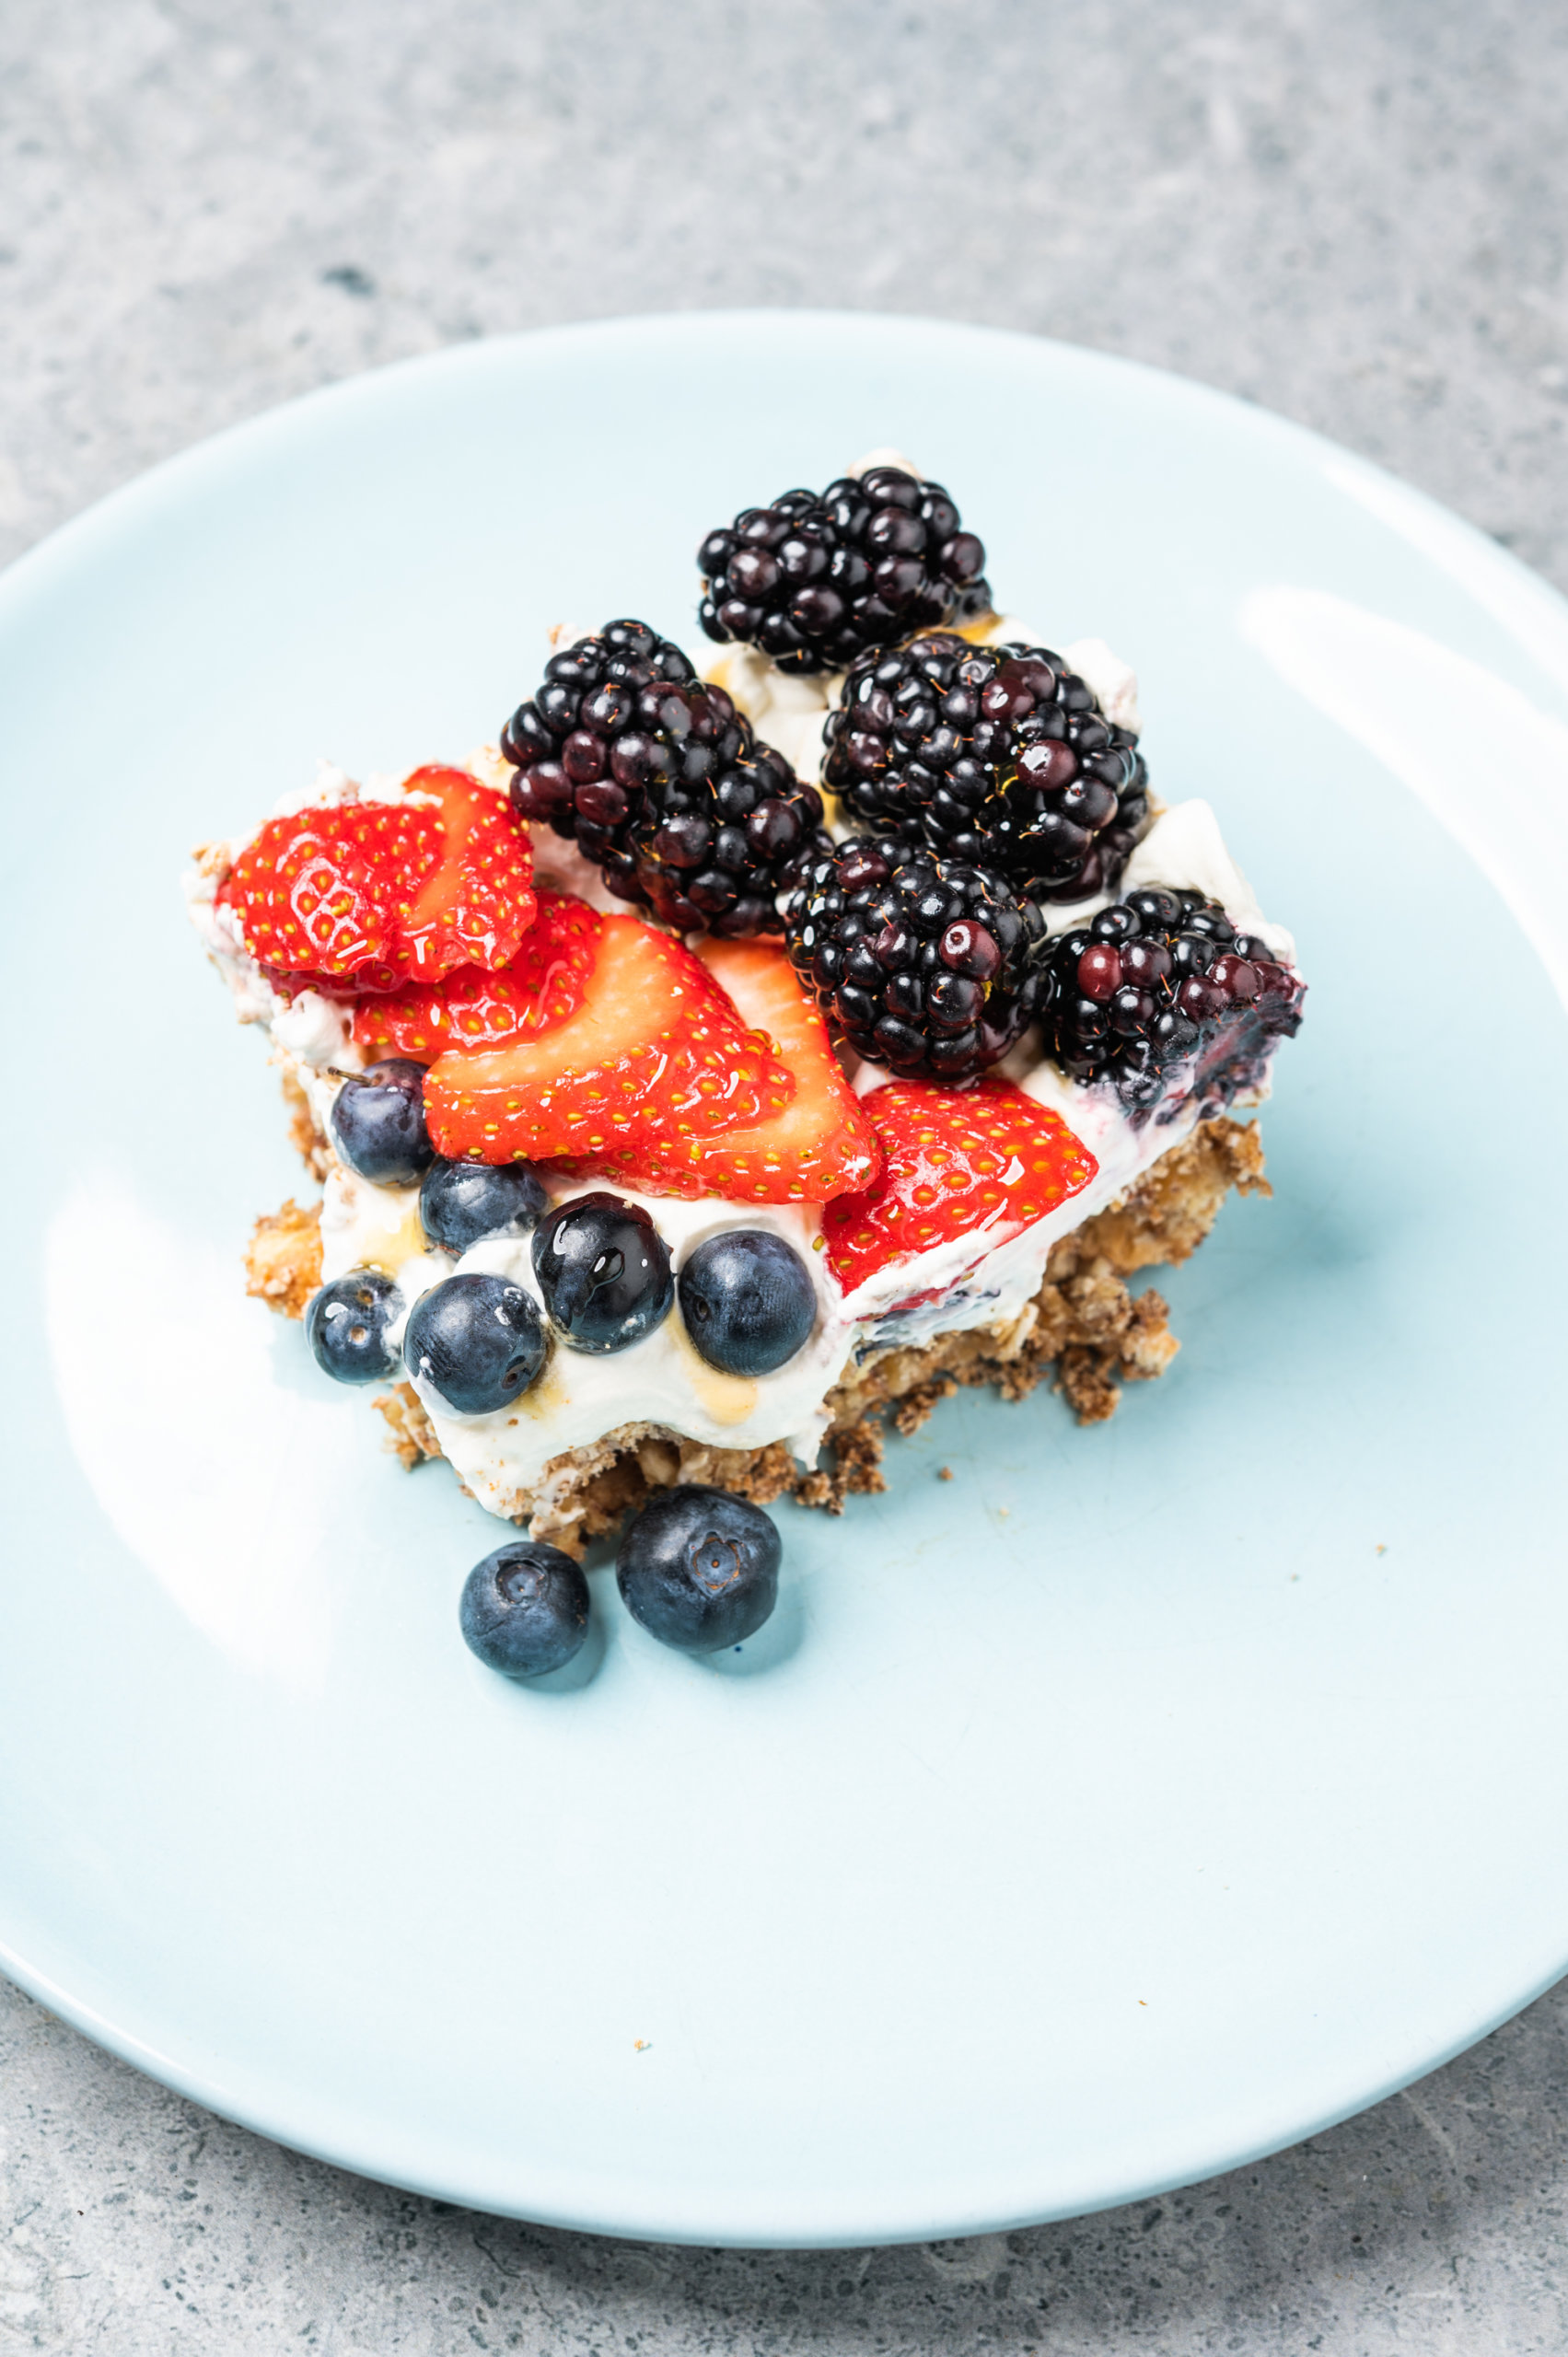 Slice of cracker pie with a saltine and meringue crust and fresh strawberries and blackberries